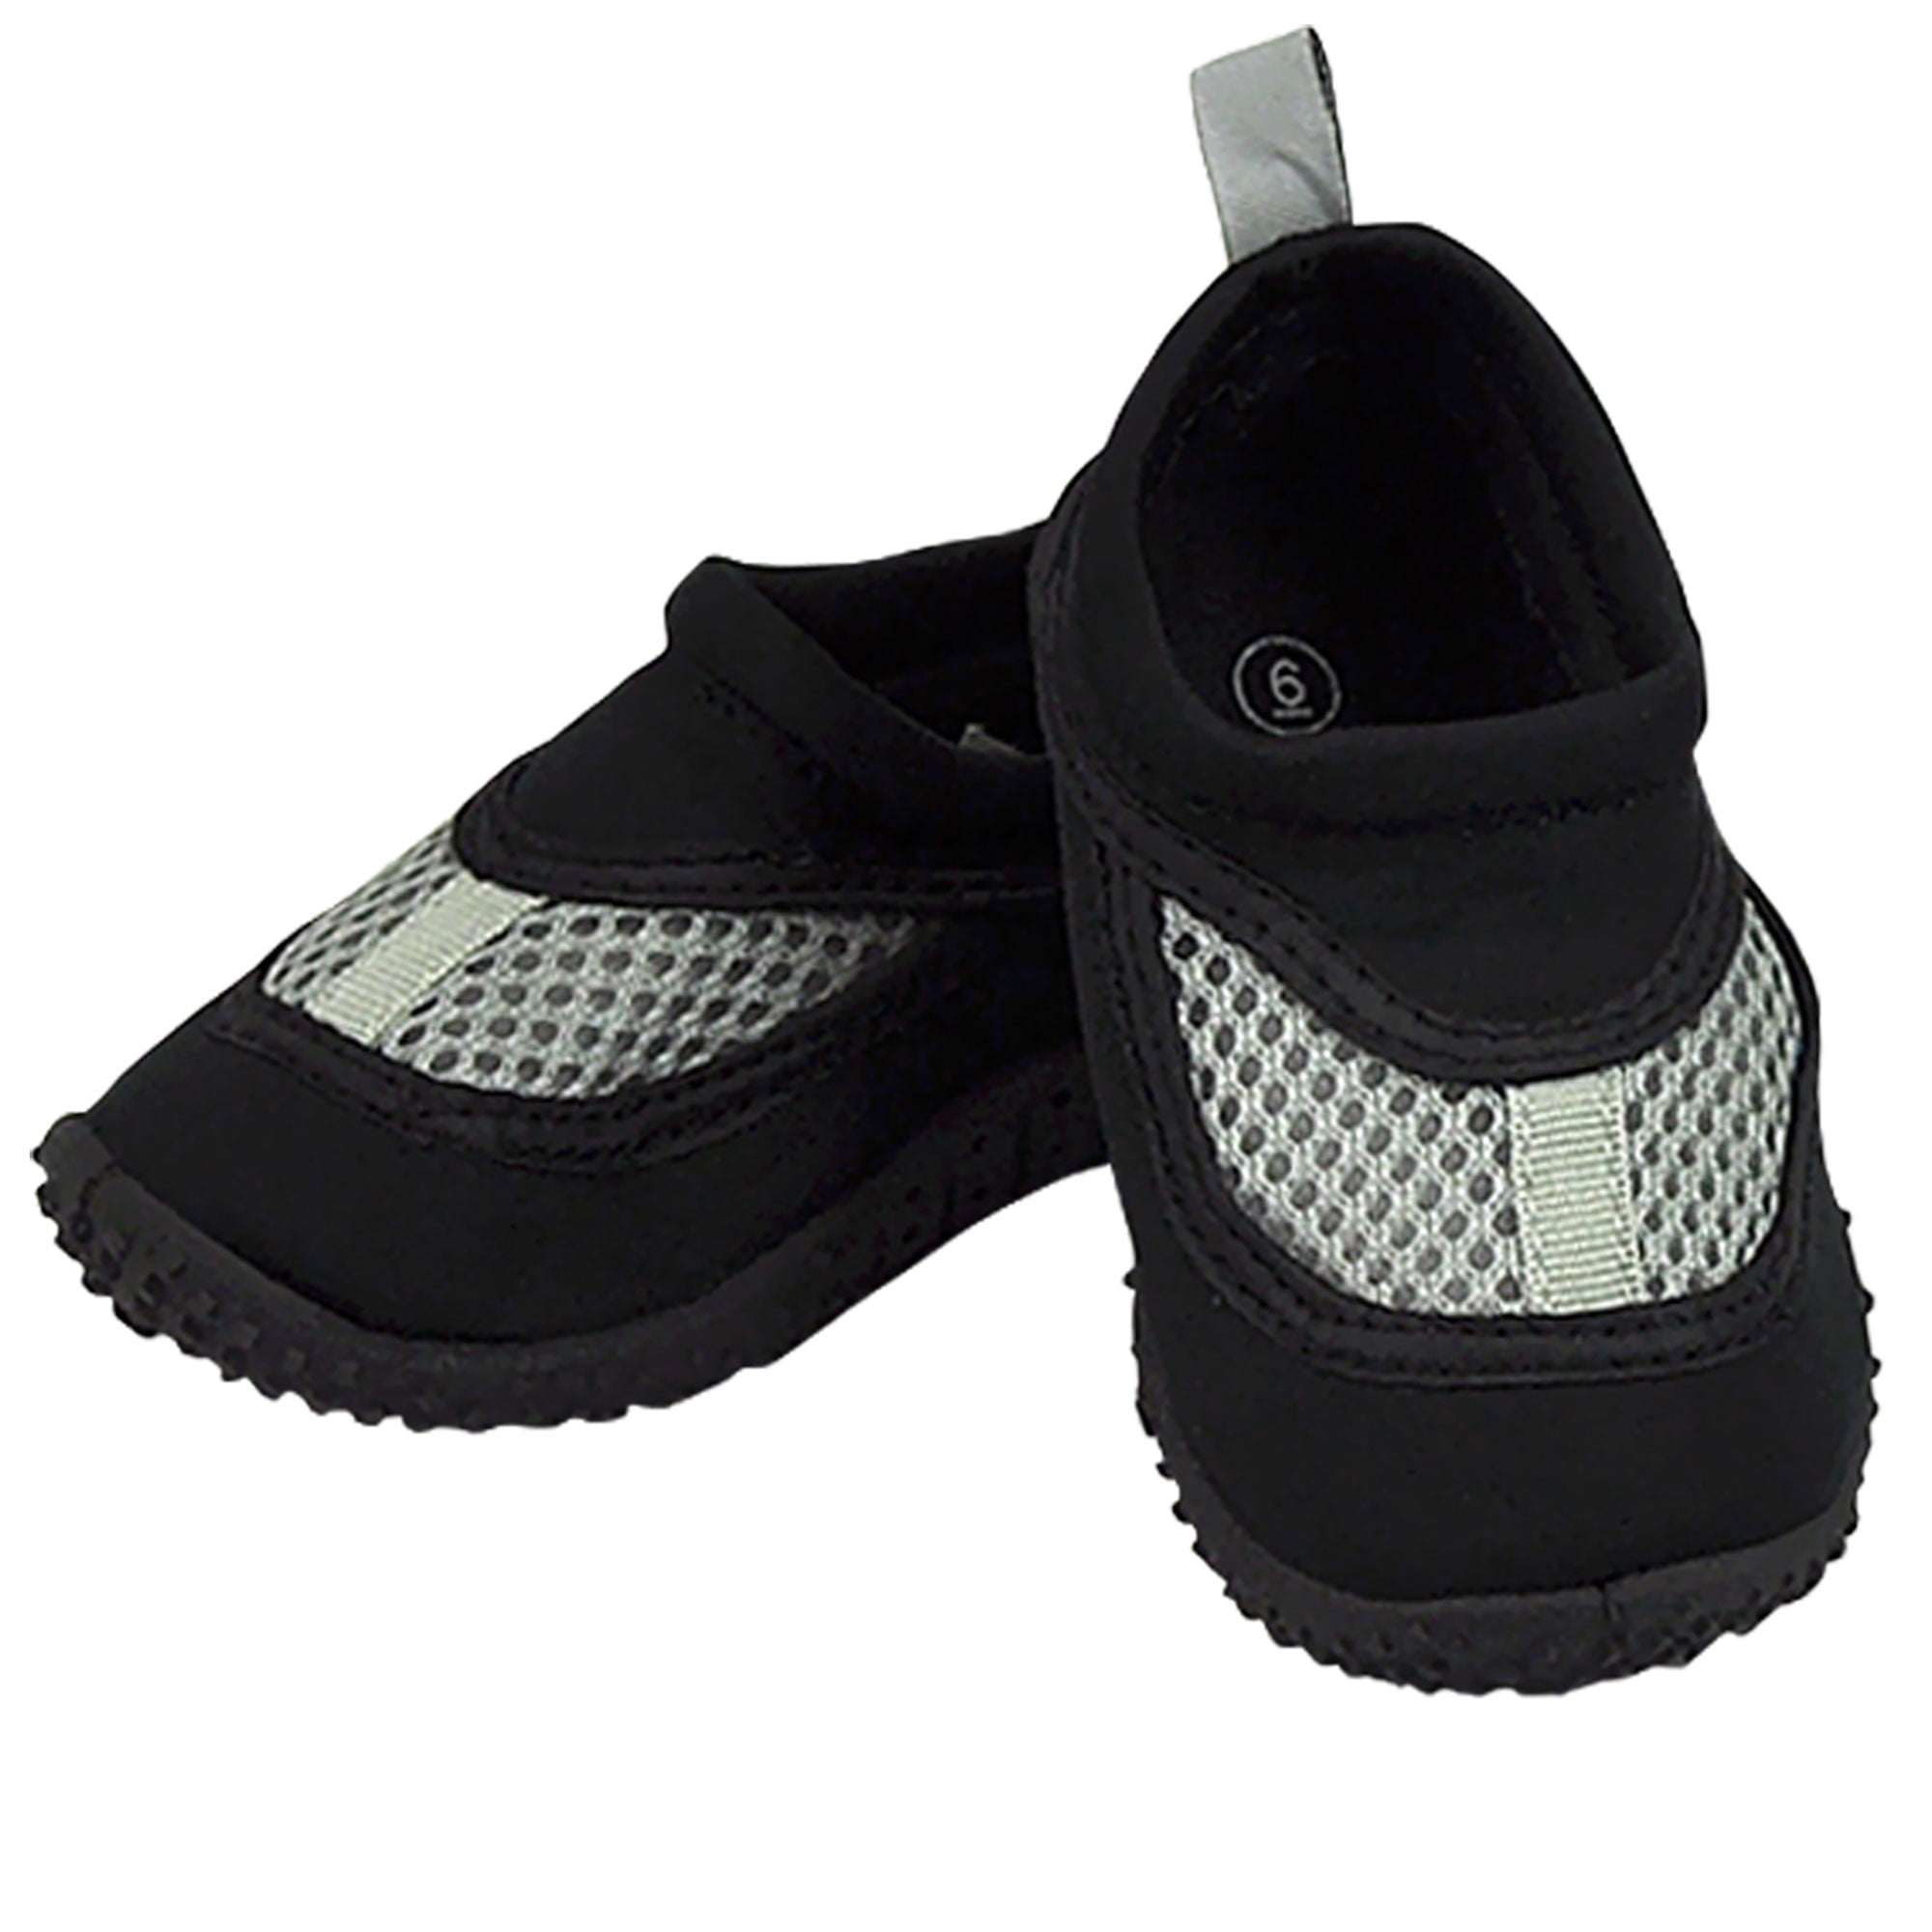 infant size 5 water shoes